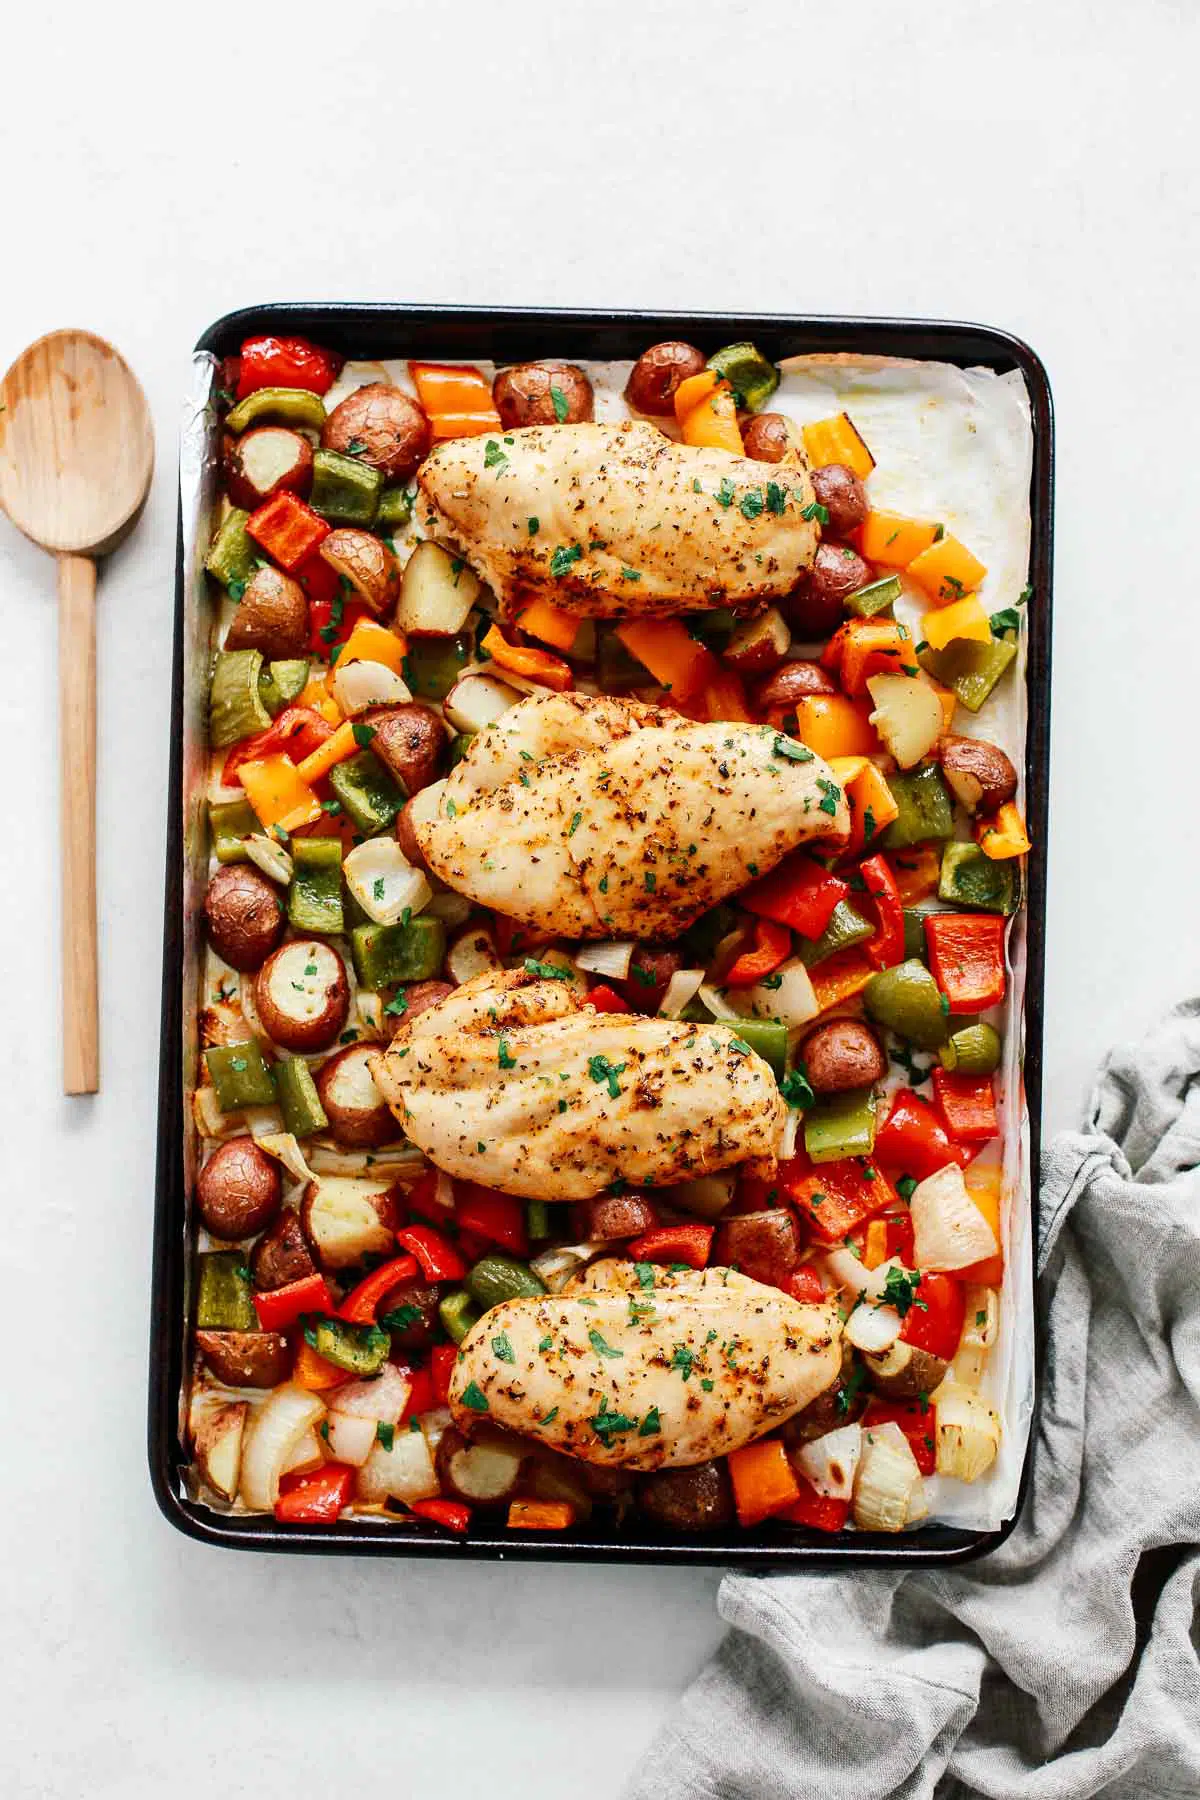 Chicken and Vegetables in a baking sheet with a spoon beside it.